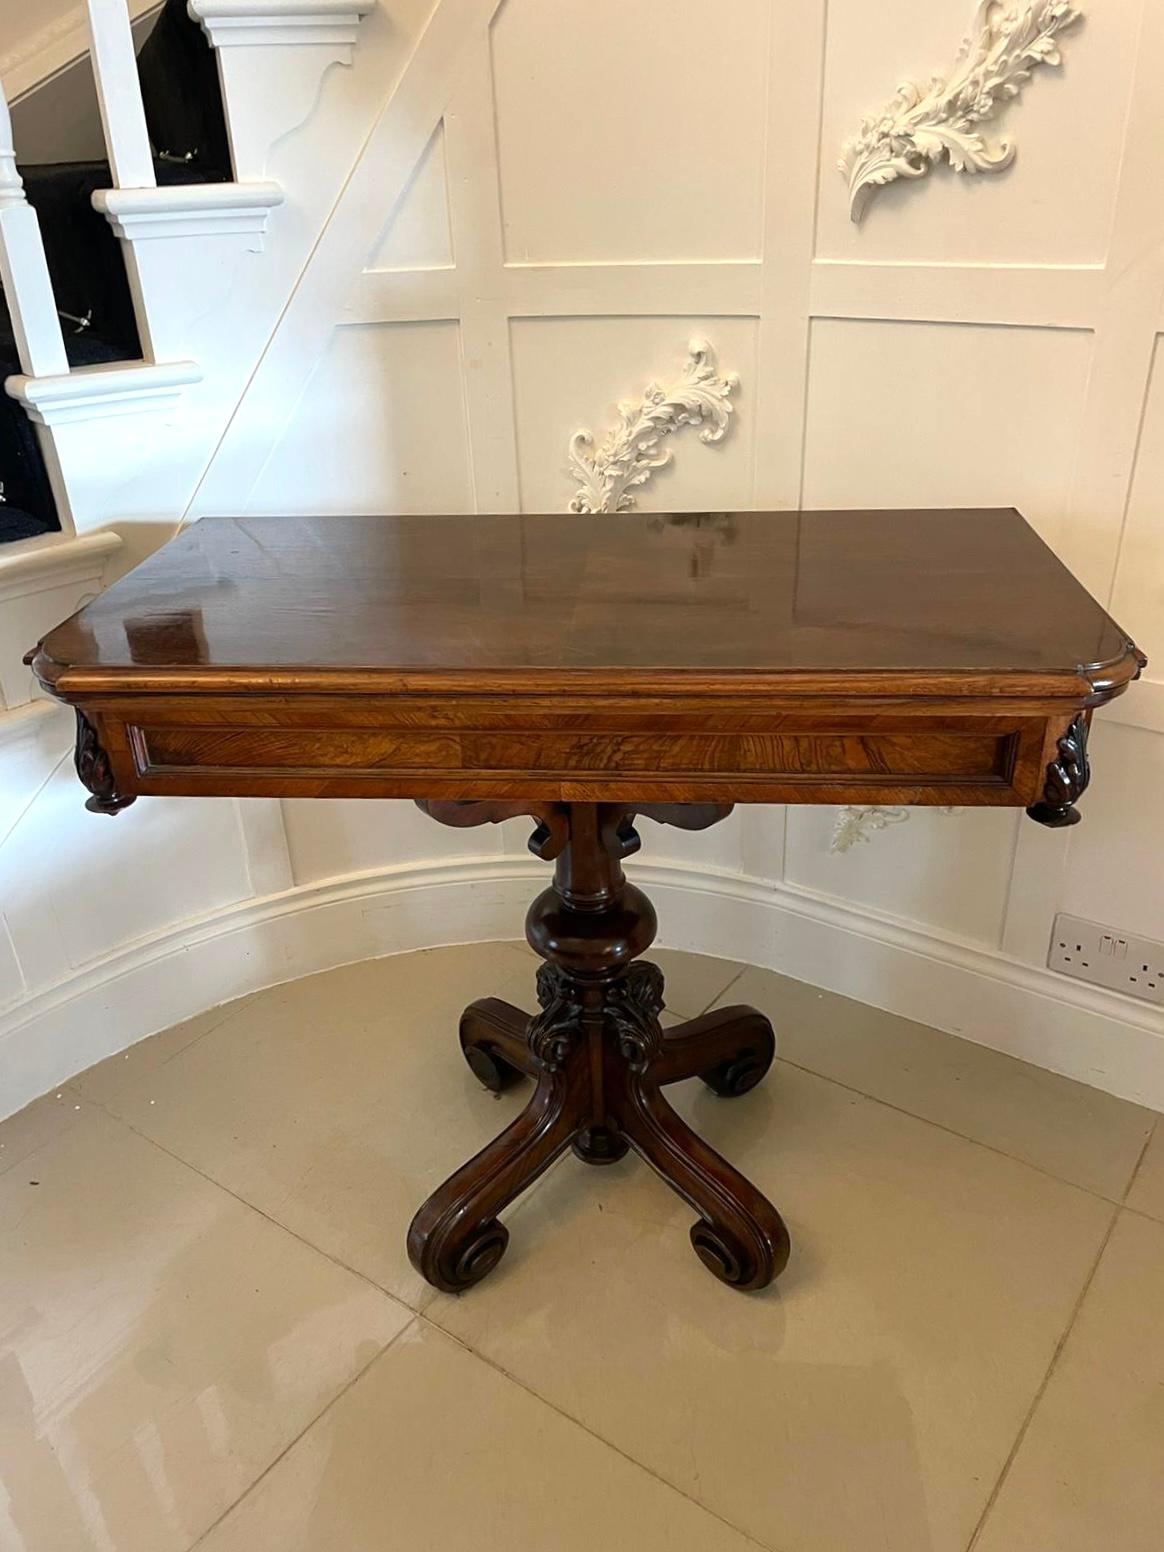 Unusual antique Victorian walnut card/side table having a lovely walnut swivel top, green baize interior and attractive carvings to the frieze. It boasts a delightful turned carved column. It stands on four carved shaped legs.

This solid walnut